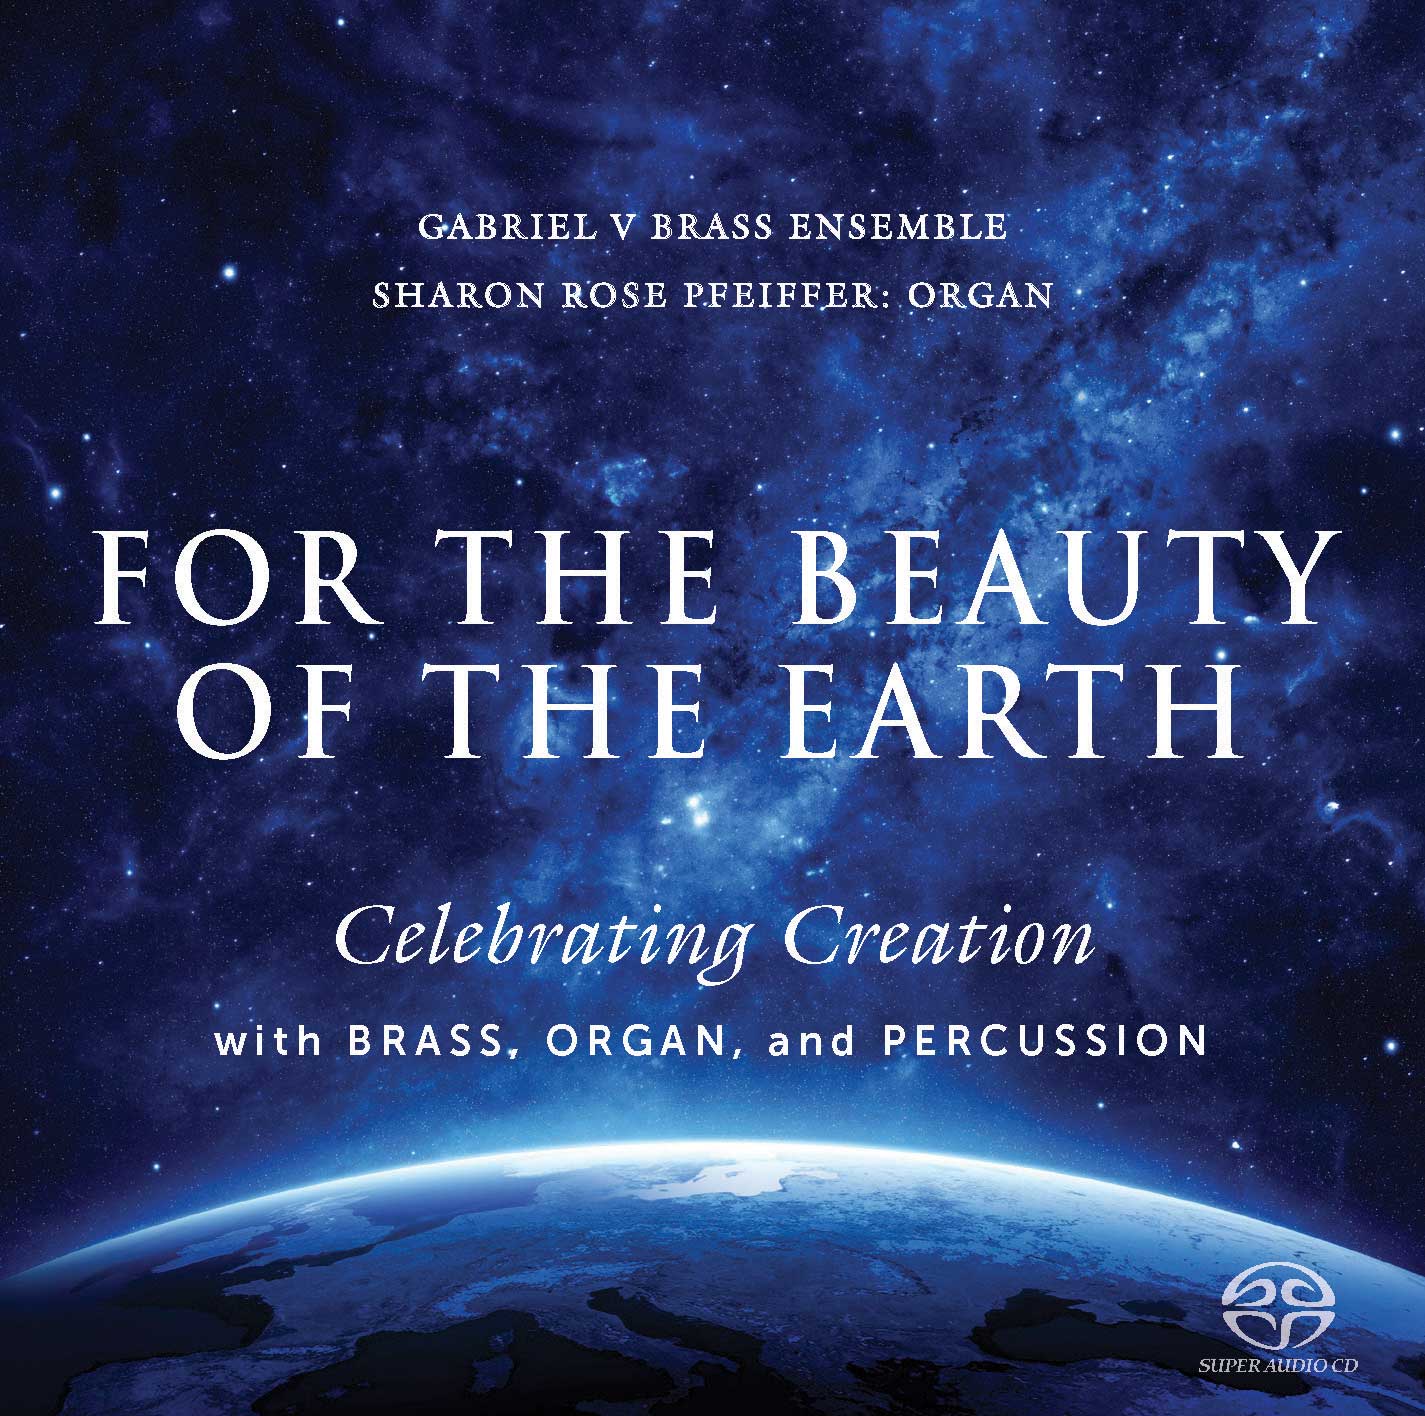 product image of 'For the Beauty of the Earth' Gabriel V Brass Ensemble and E.M. Skinner organ recording